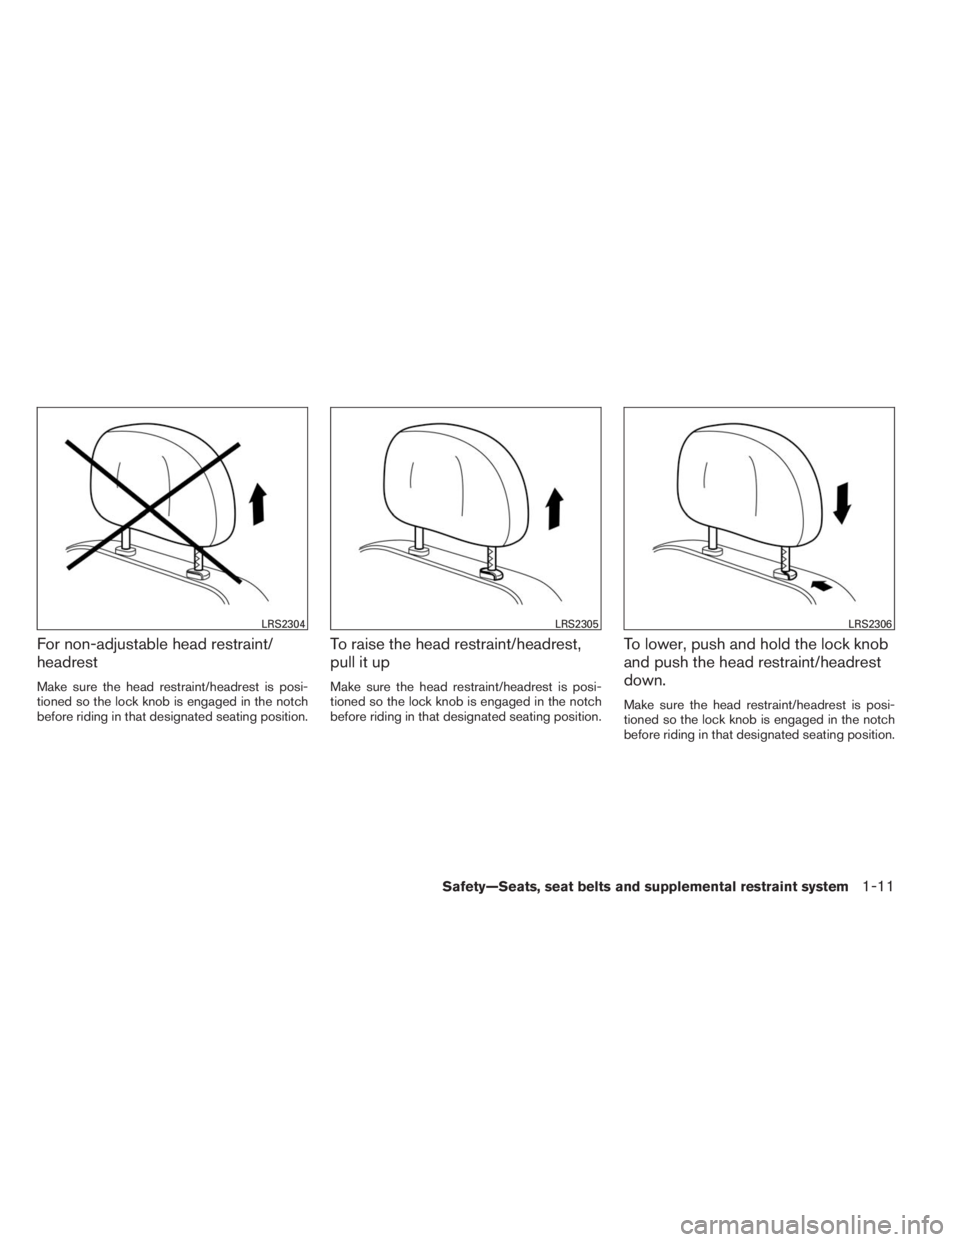 INFINITI QX60 2014 Owners Guide For non-adjustable head restraint/
headrest
Make sure the head restraint/headrest is posi-
tioned so the lock knob is engaged in the notch
before riding in that designated seating position.
To raise t